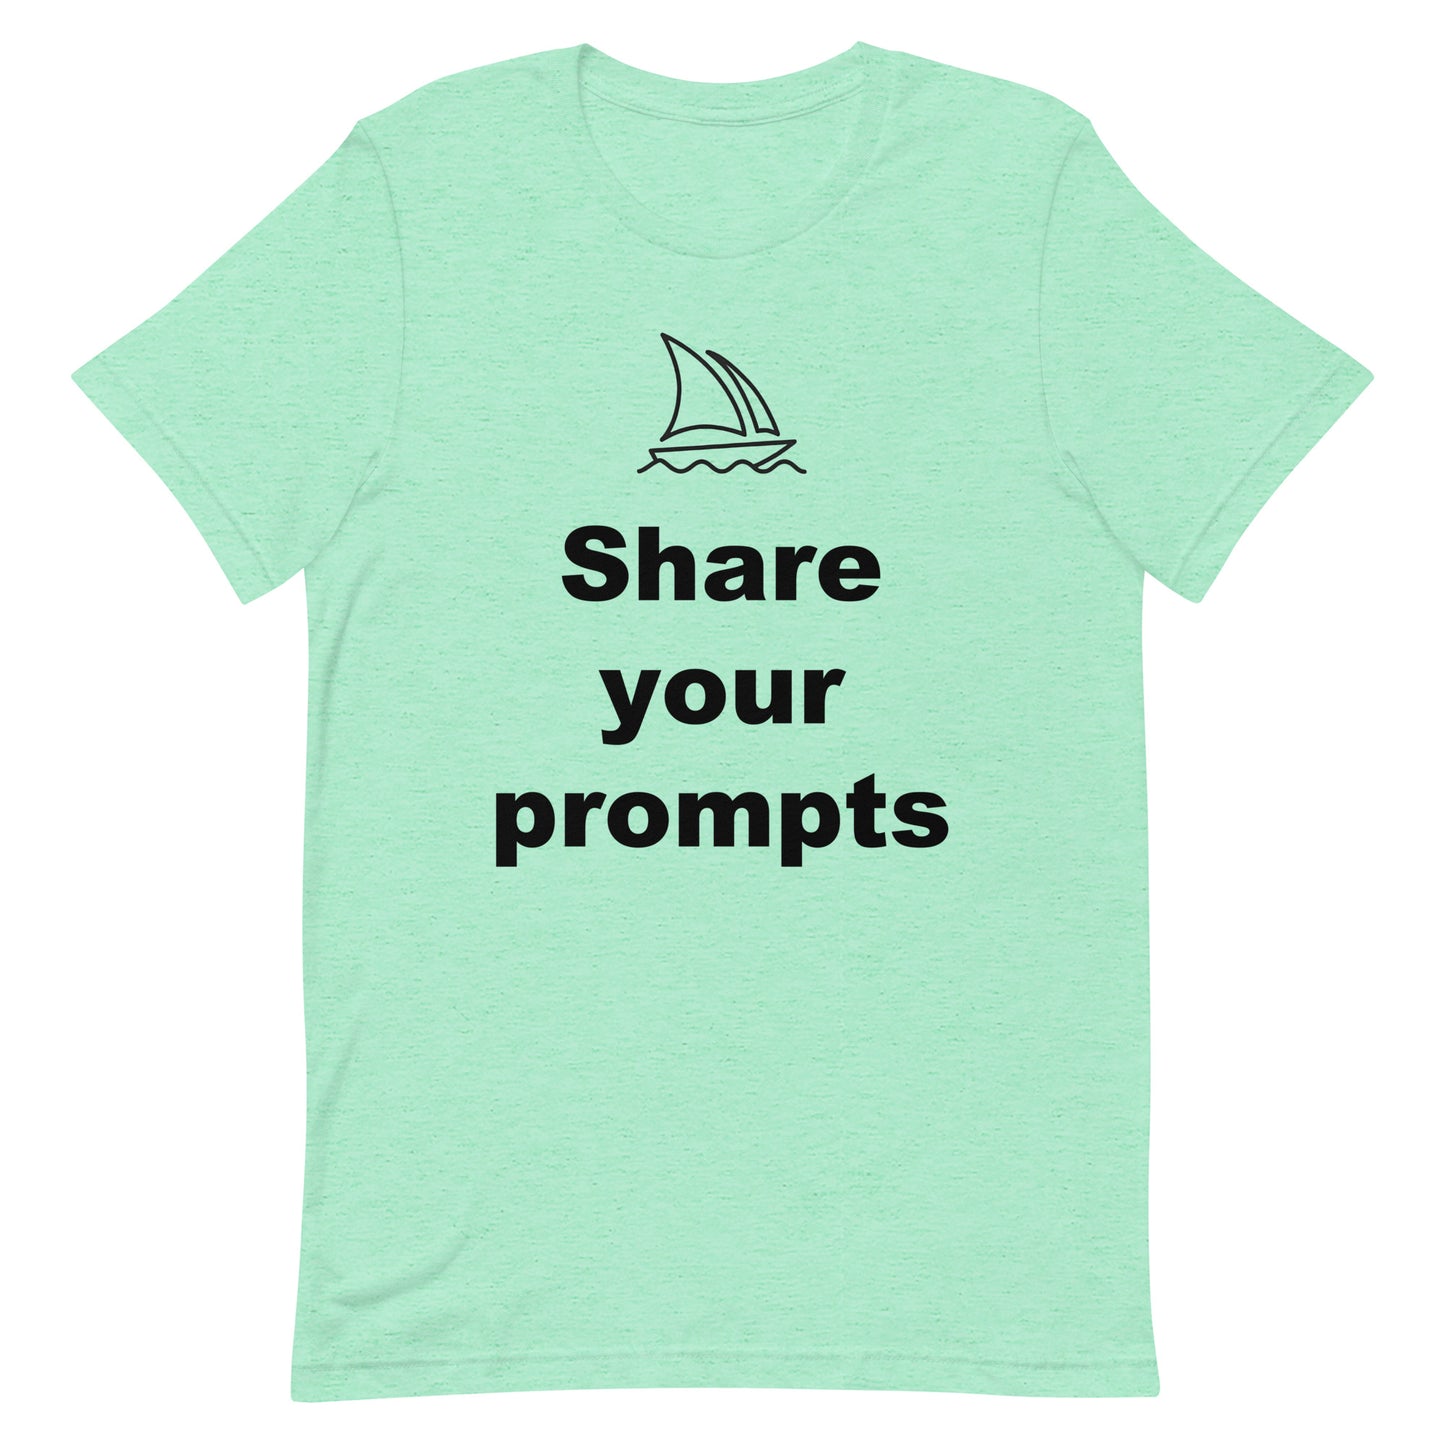 Midjourney AI "Share your Prompts" shirt